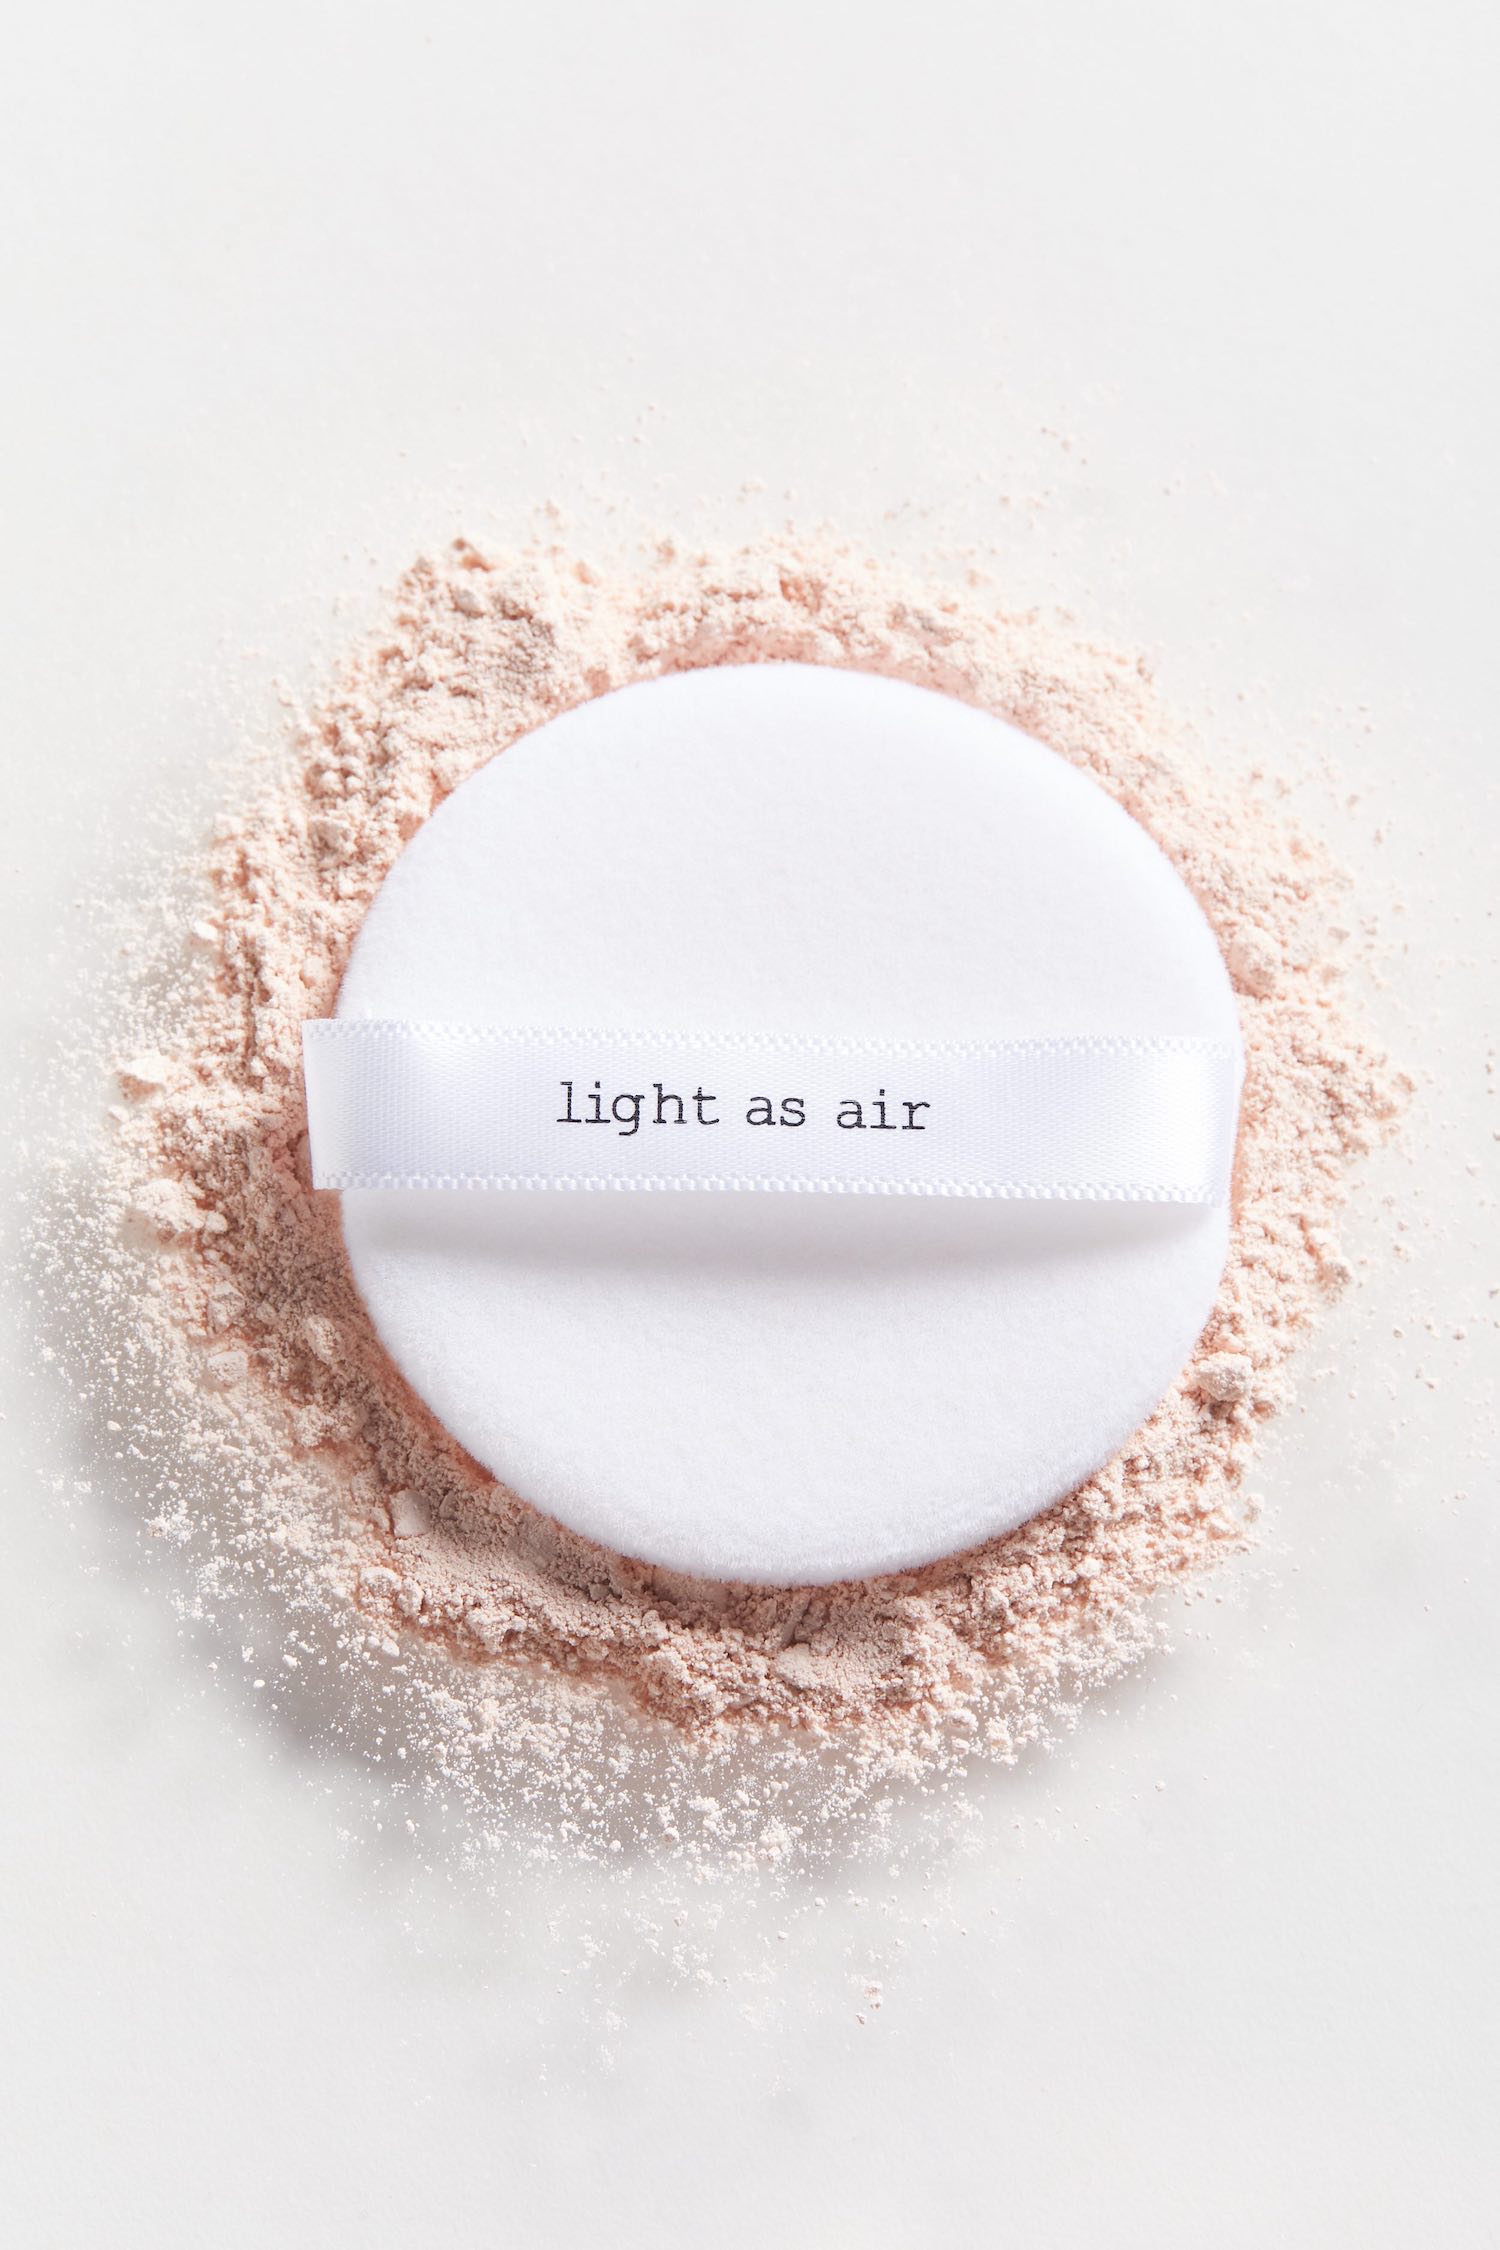 Beautyblog Bare Minds ohii Urban Outfitters glass powder